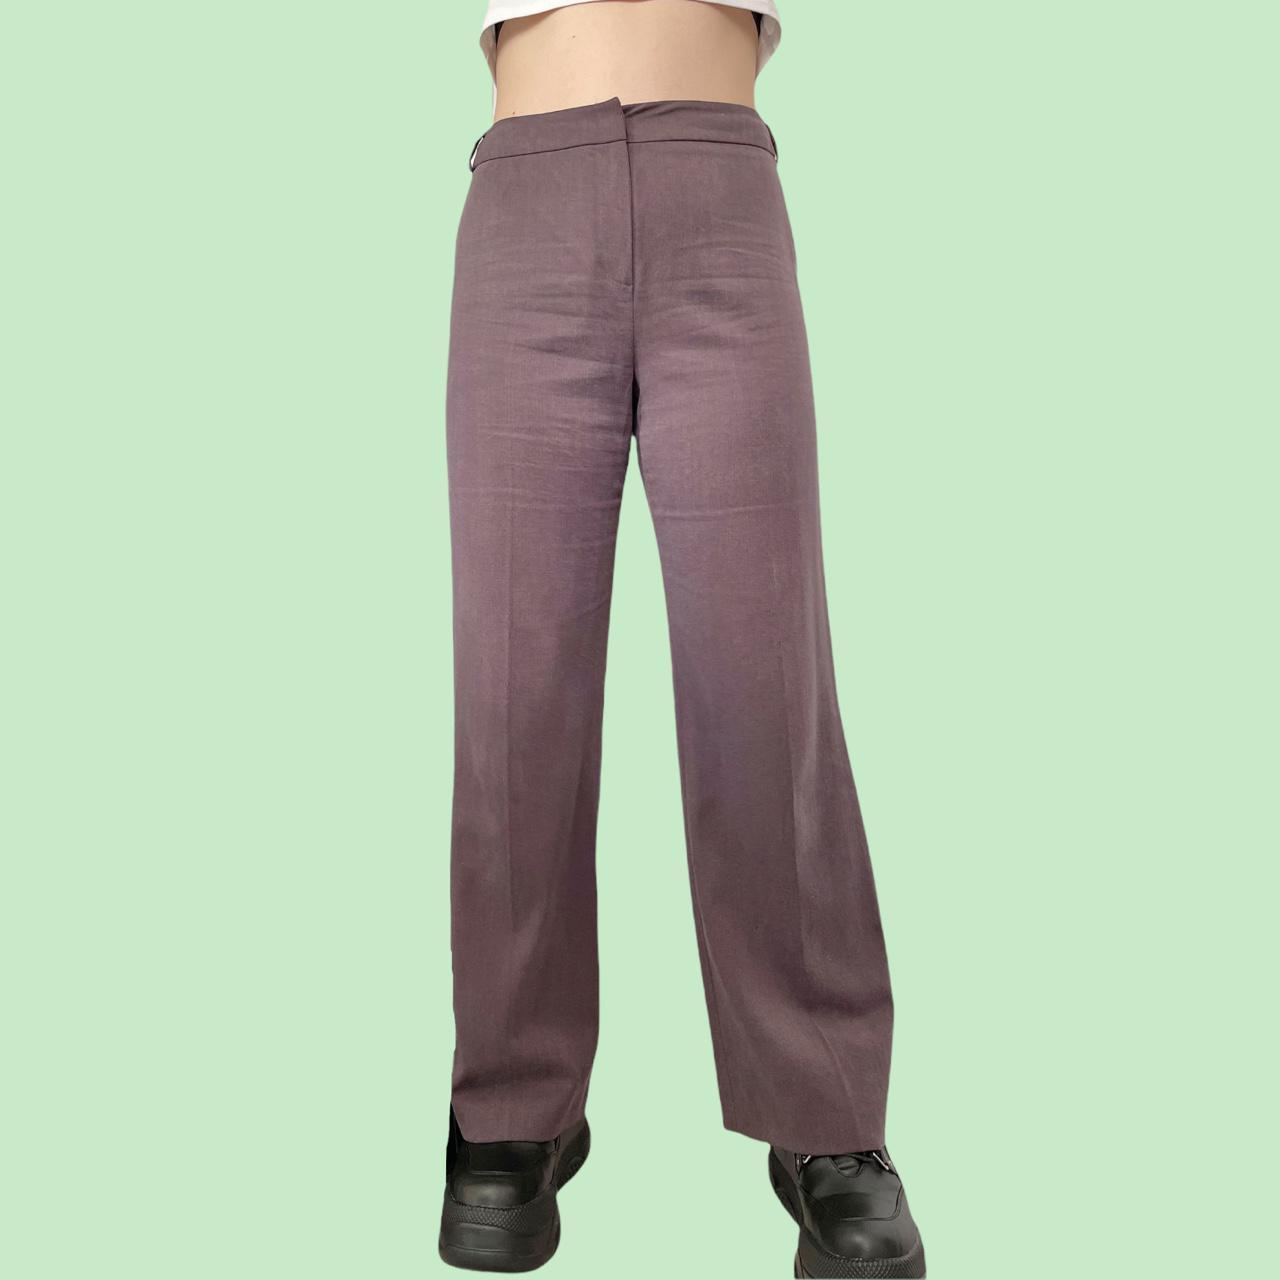 Product Image 2 - Petite flared trousers

In excellent vintage